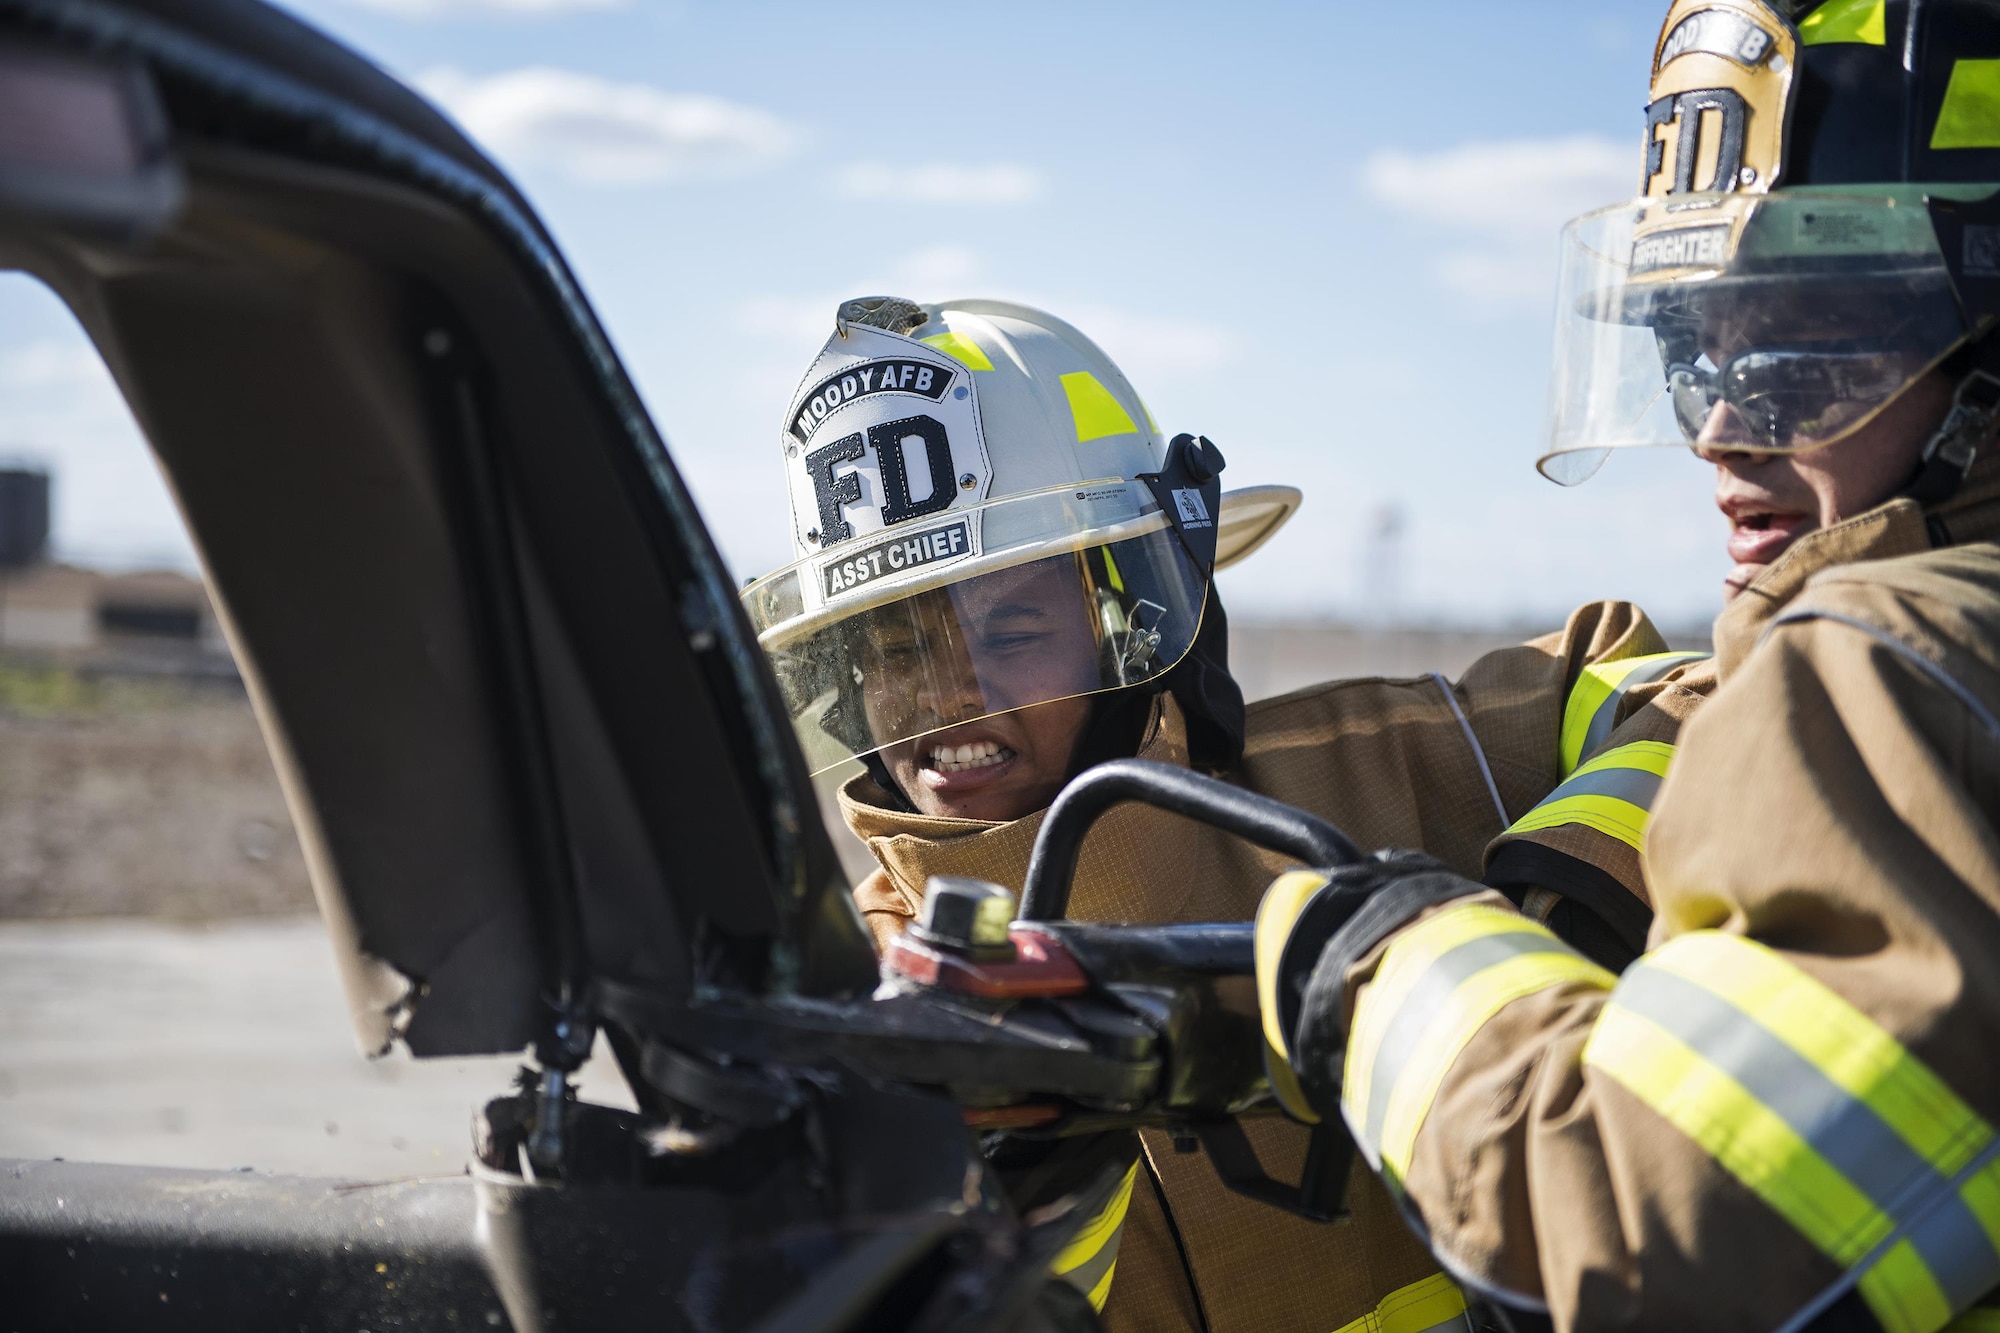 Senior Airman Gelisa Johnson, 23d Medical Operations Squadron uses a cutter, during Vehicle Extrication training, Jan. 13, 2017, at Moody Air Force Base, Ga. The cutter is strong enough to cut through sheet metal and hard plastic and is used on vehicles to free trapped passengers. (U.S. Air Force photo by Airman 1st Class Janiqua P. Robinson)